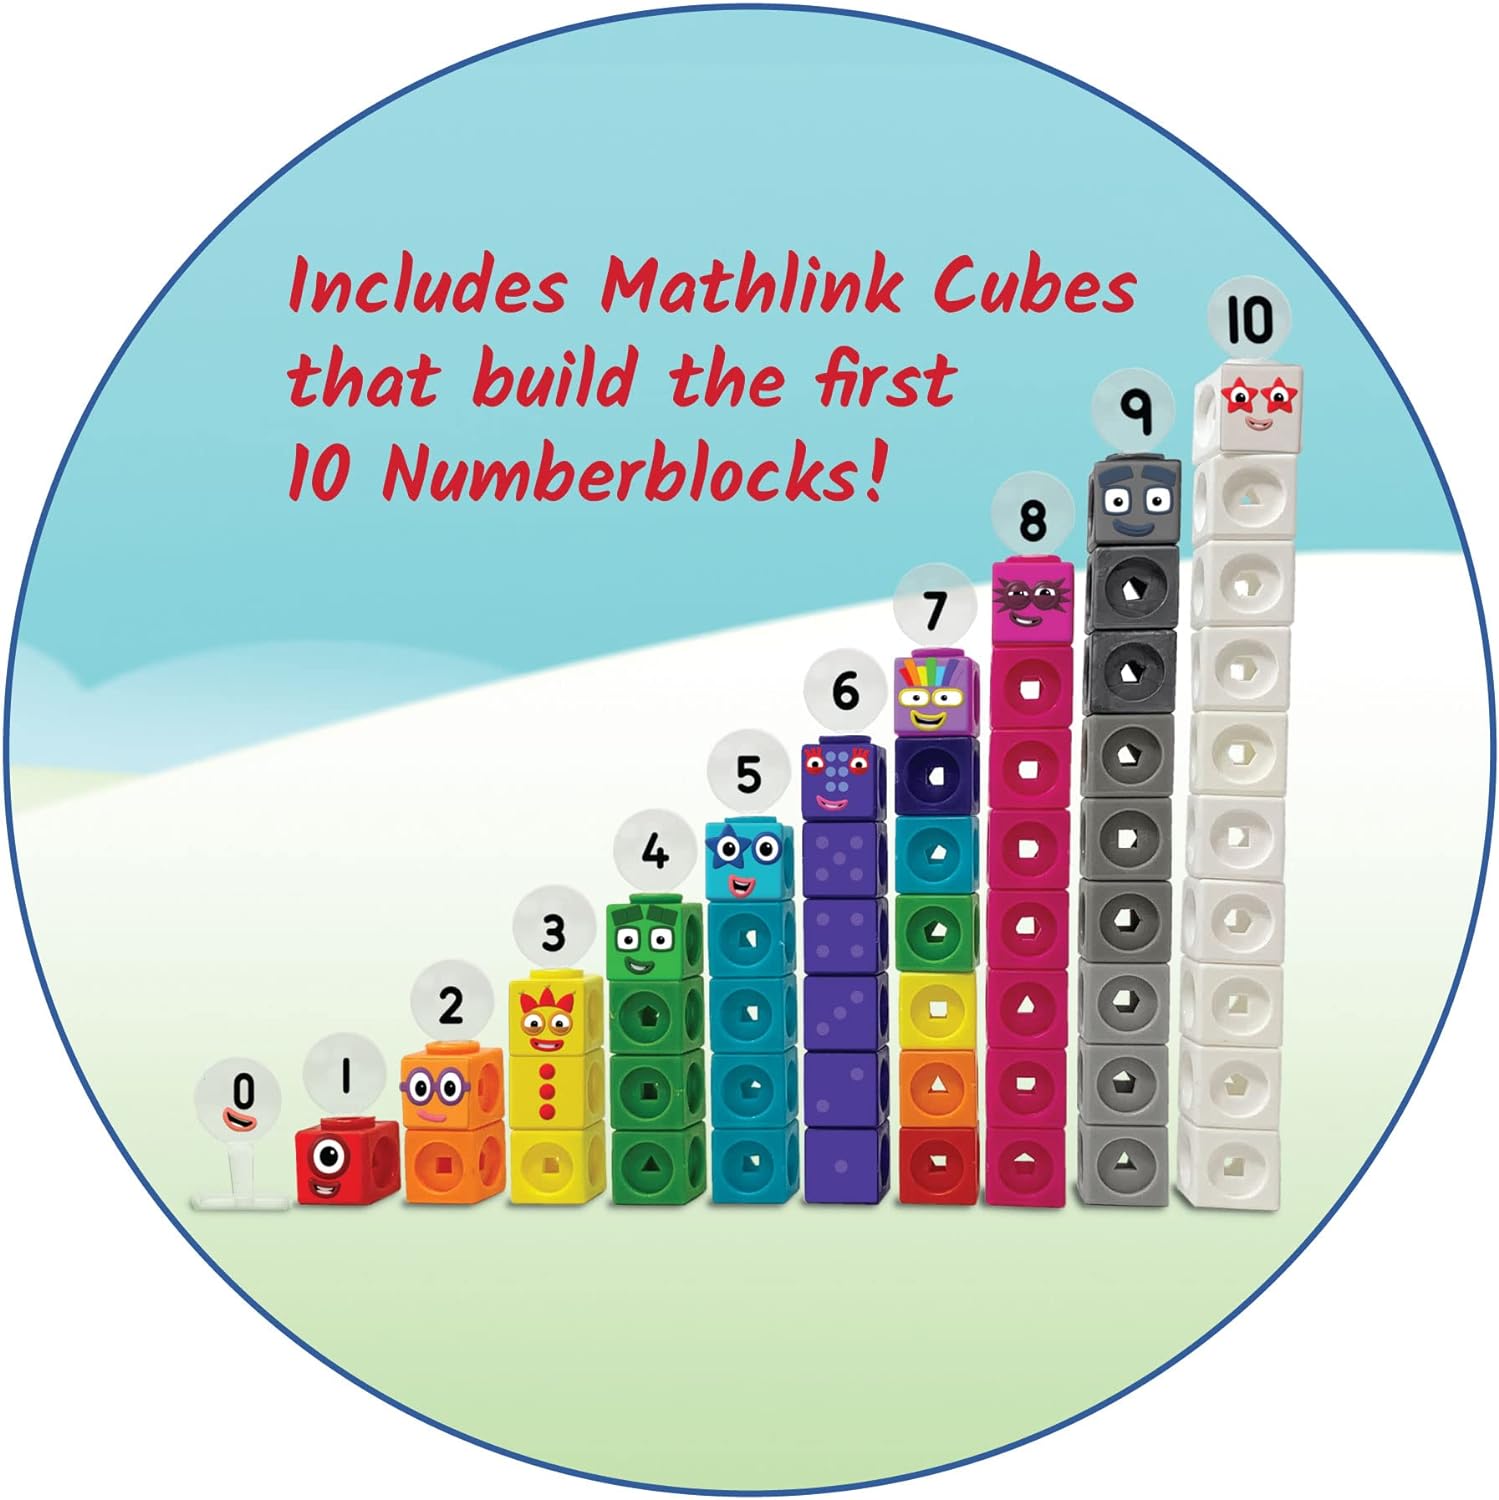 An infographic that says: Includes Mathlink Cubes that build the first 10 Numberblocks!